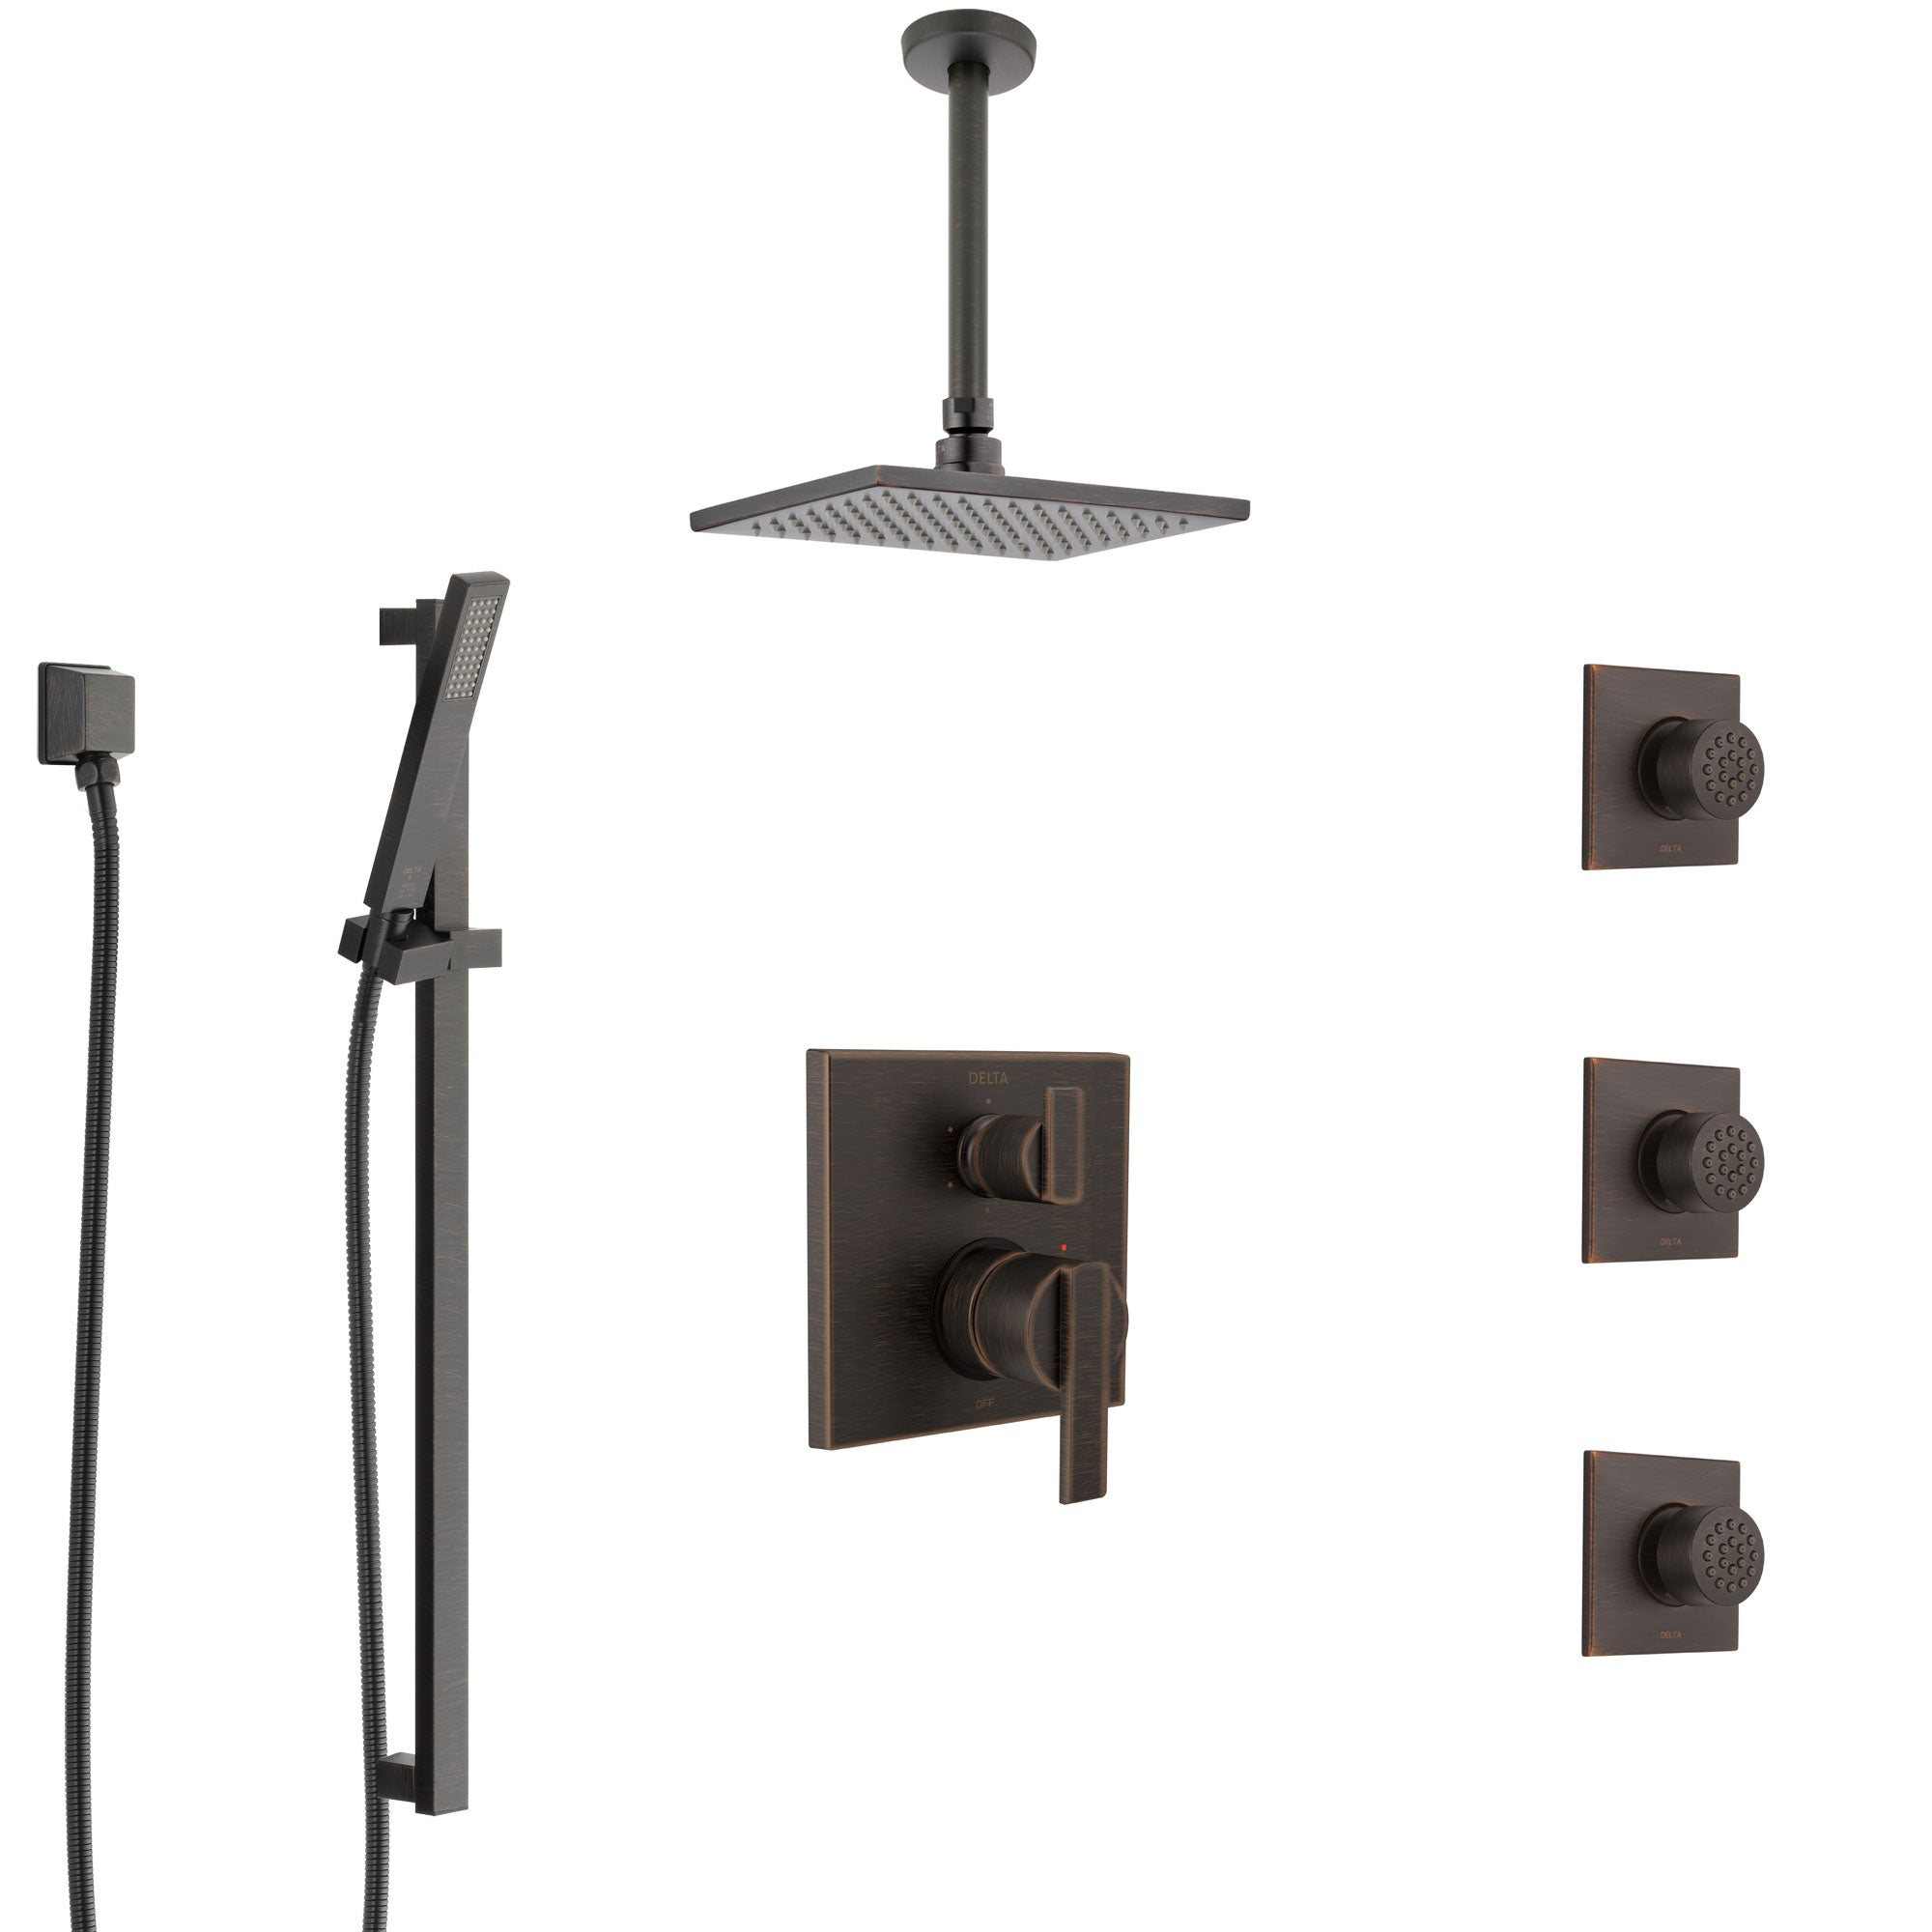 Delta Ara Venetian Bronze Shower System with Control Handle, Integrated Diverter, Ceiling Mount Showerhead, 3 Body Sprays, and Hand Shower SS24967RB4